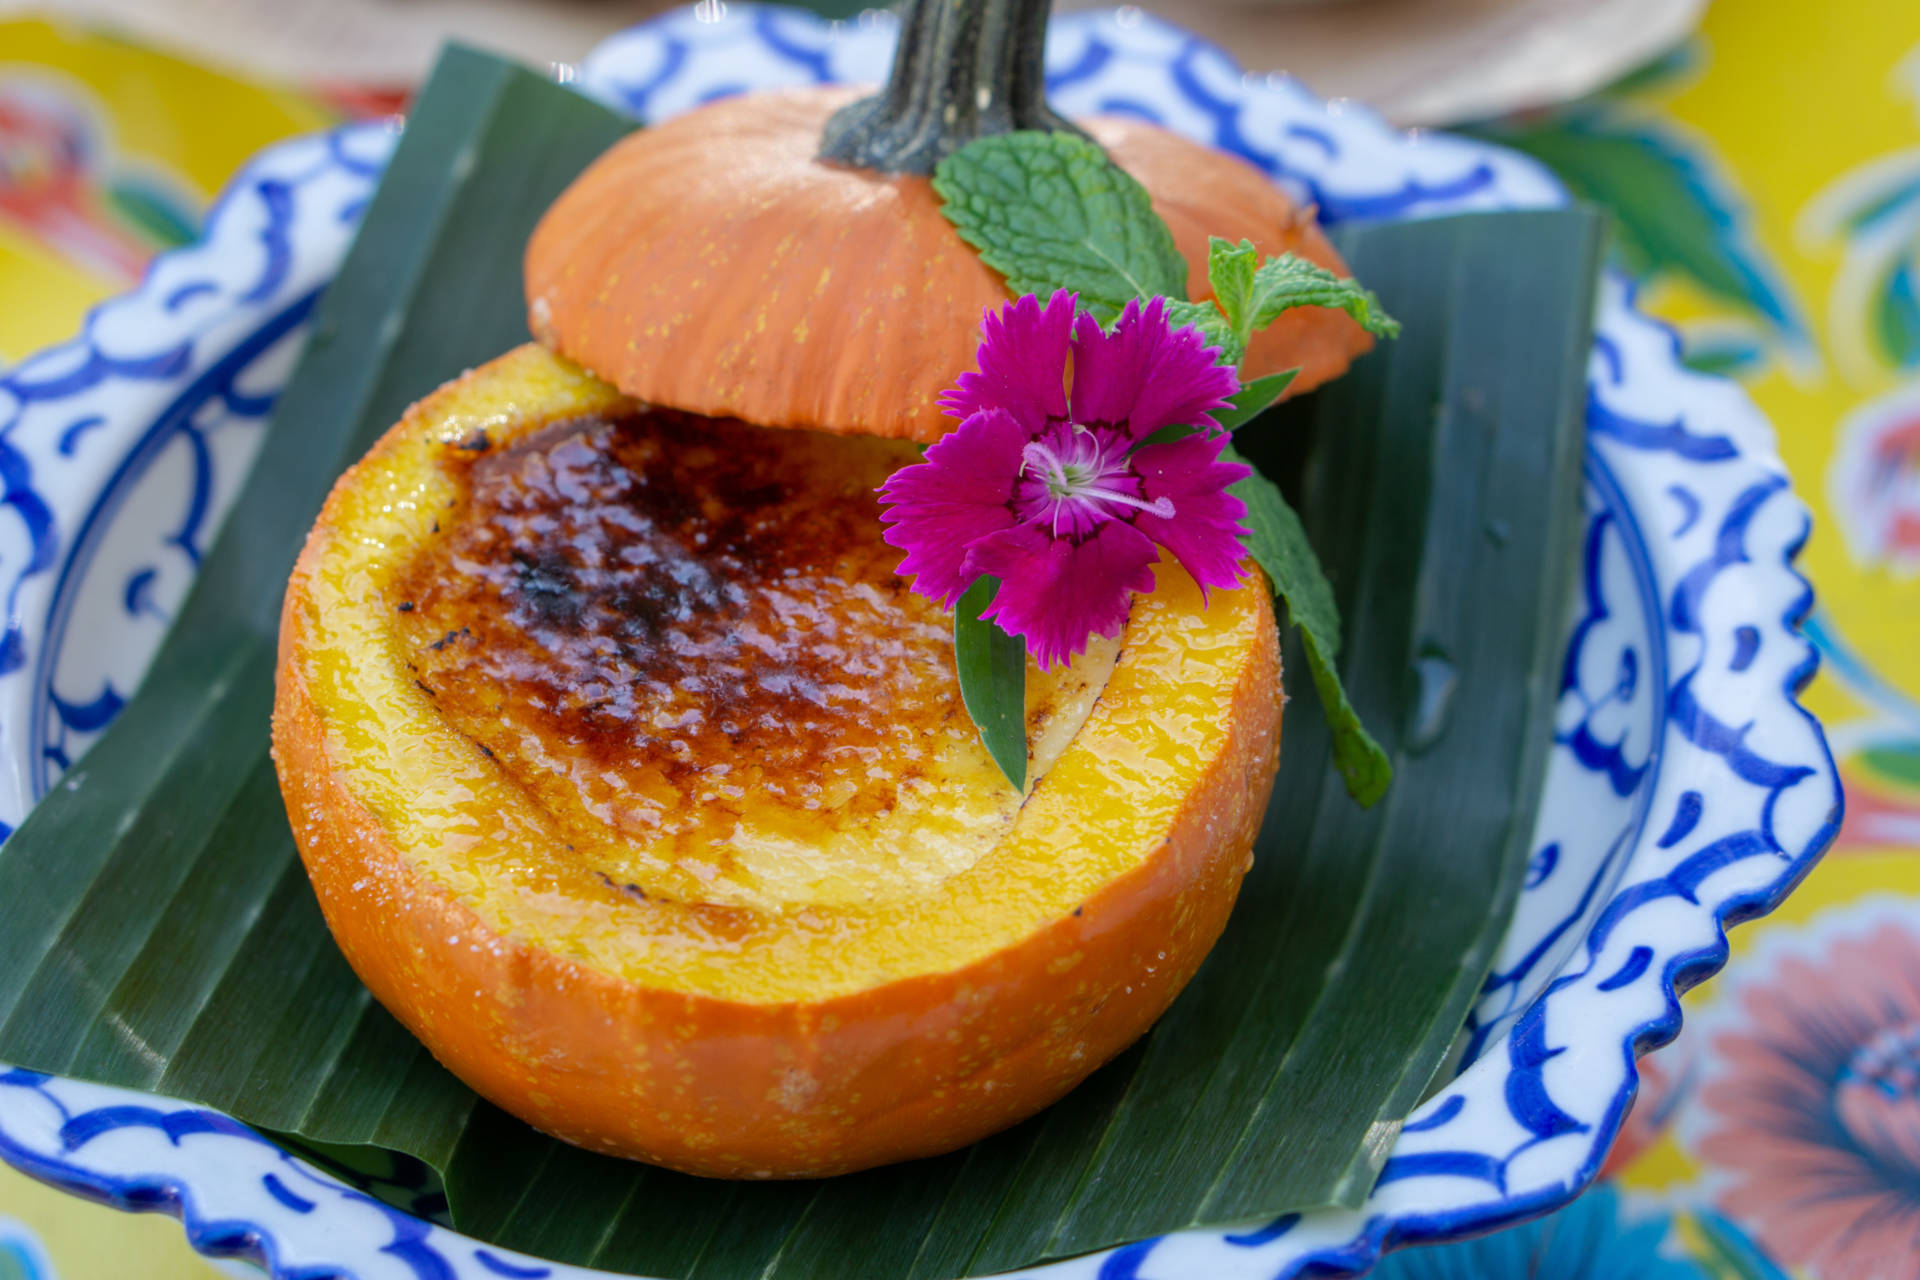 Pumpkin Creme Brulee is served up in a real pumpkin, dainty and delicious.